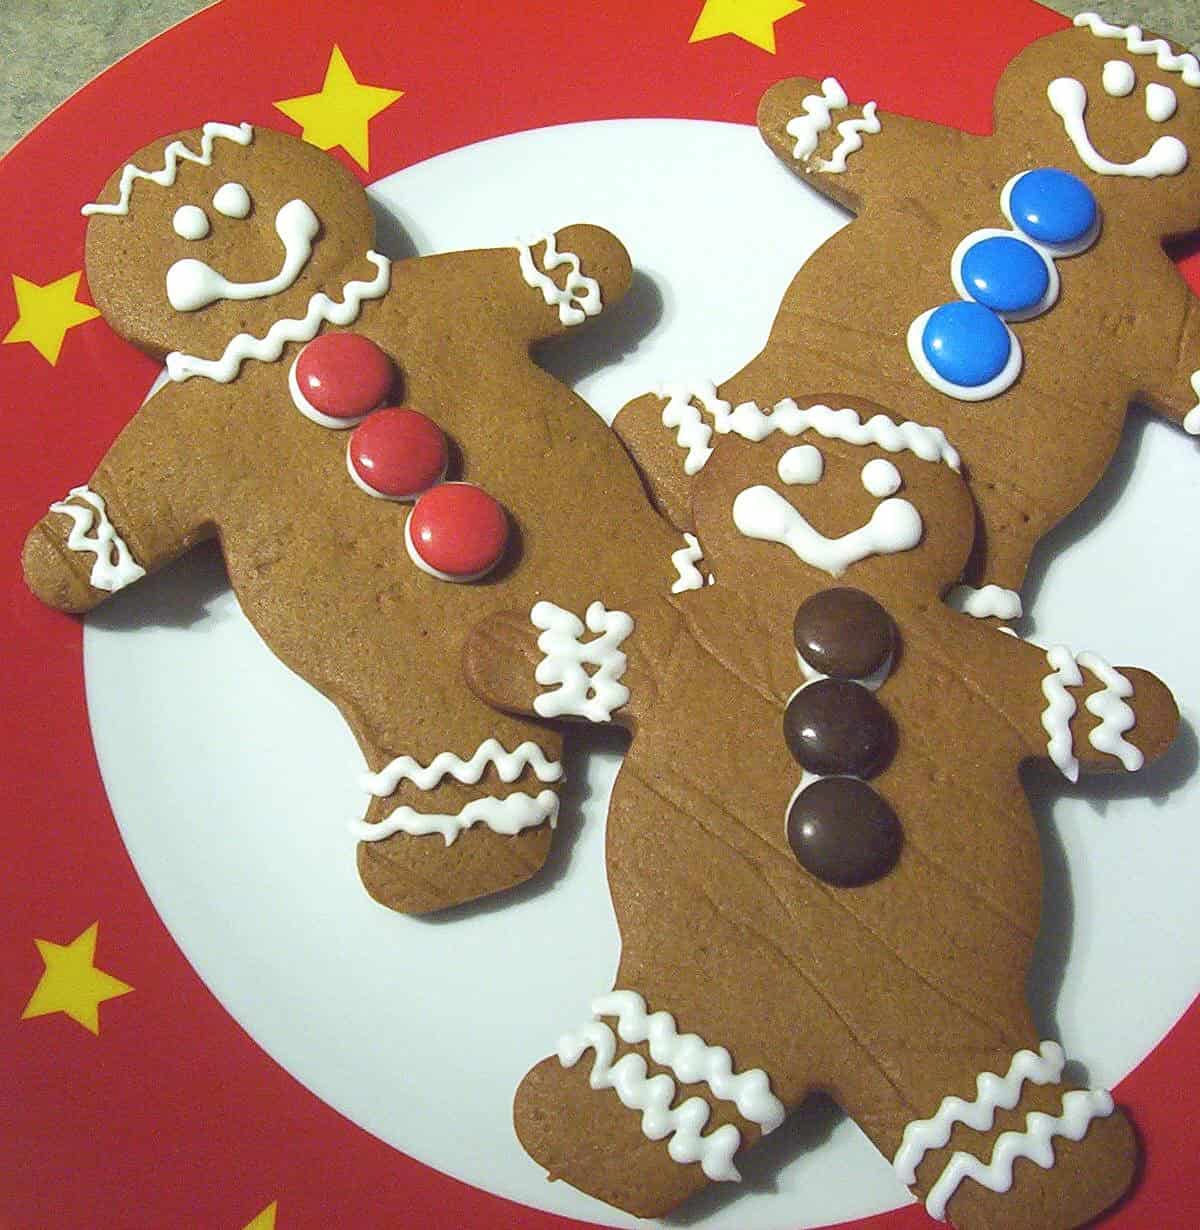  These Nauvoo Gingerbread Cookies are the perfect treat to get into the holiday spirit!